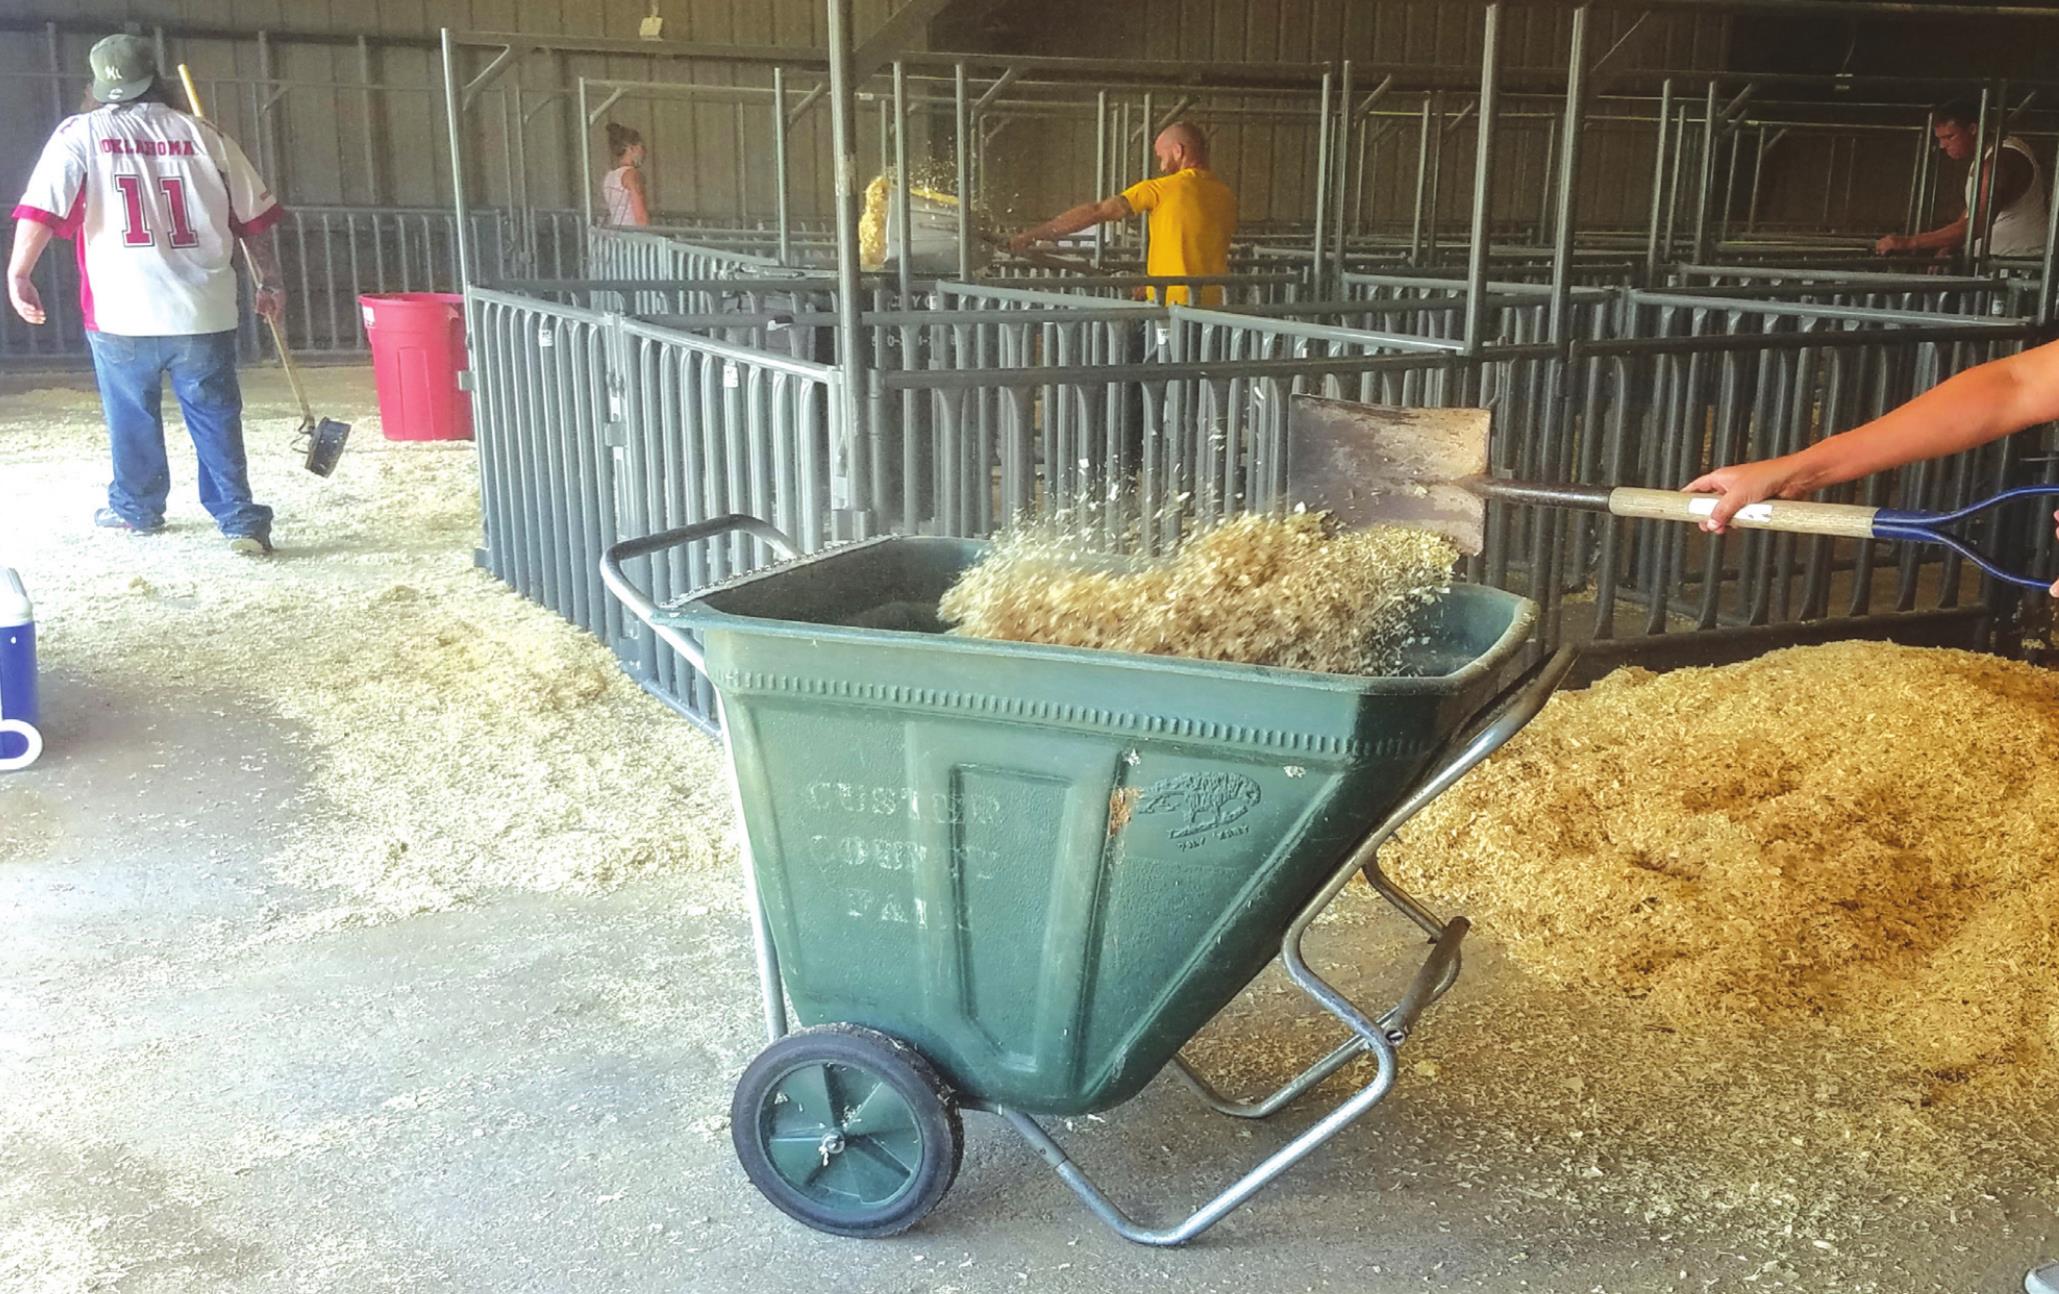 Washita-Custer County Treatment Court participants clean up old animal bedding at the Custer County Fairgrounds. Provided